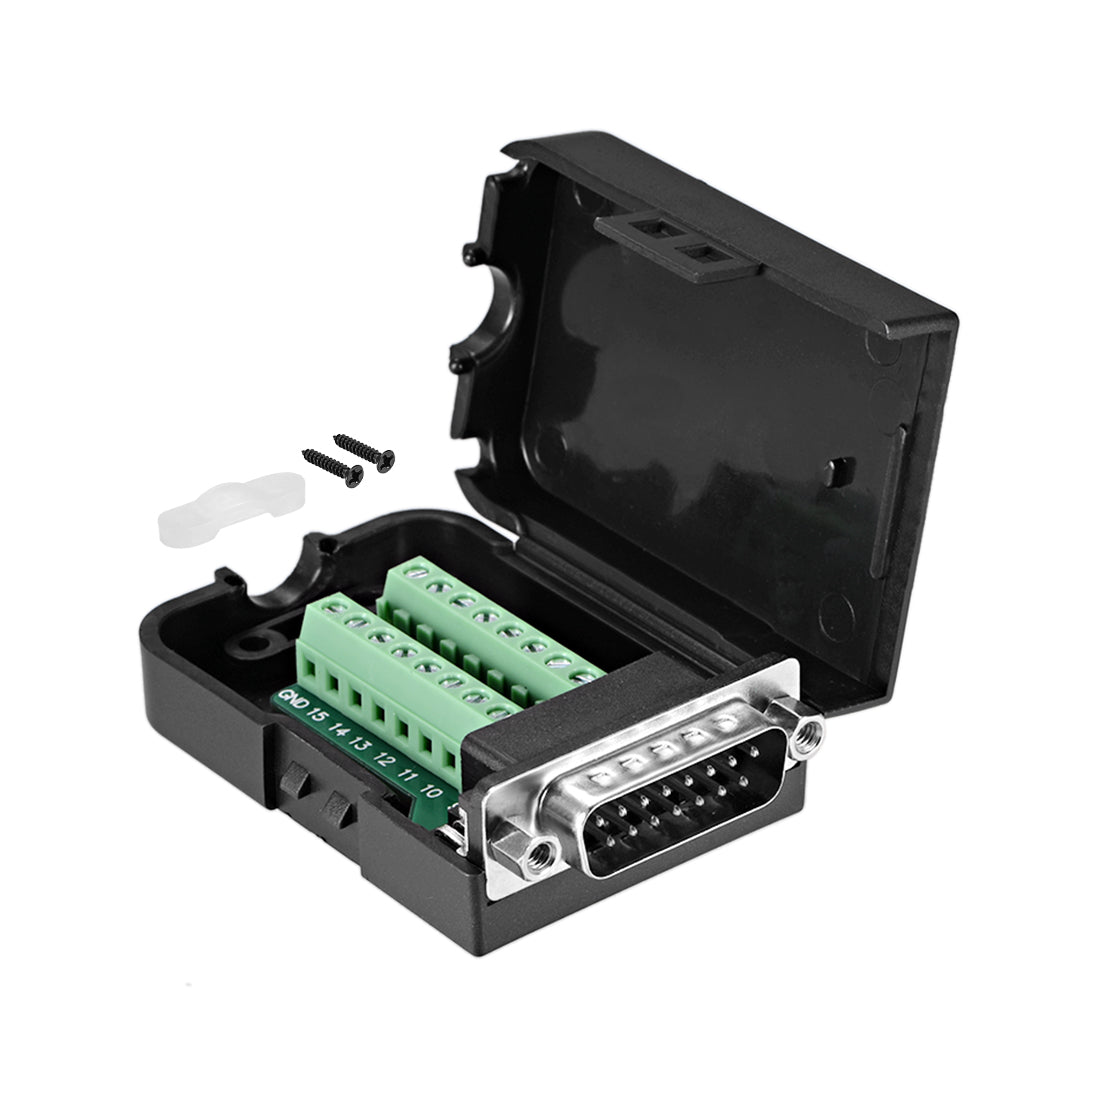 uxcell Uxcell D-sub DB15 Breakout Board Connector with Case 15 Pin 2-row Male Port Solderless Terminal Block Adapter with Positioning Nuts